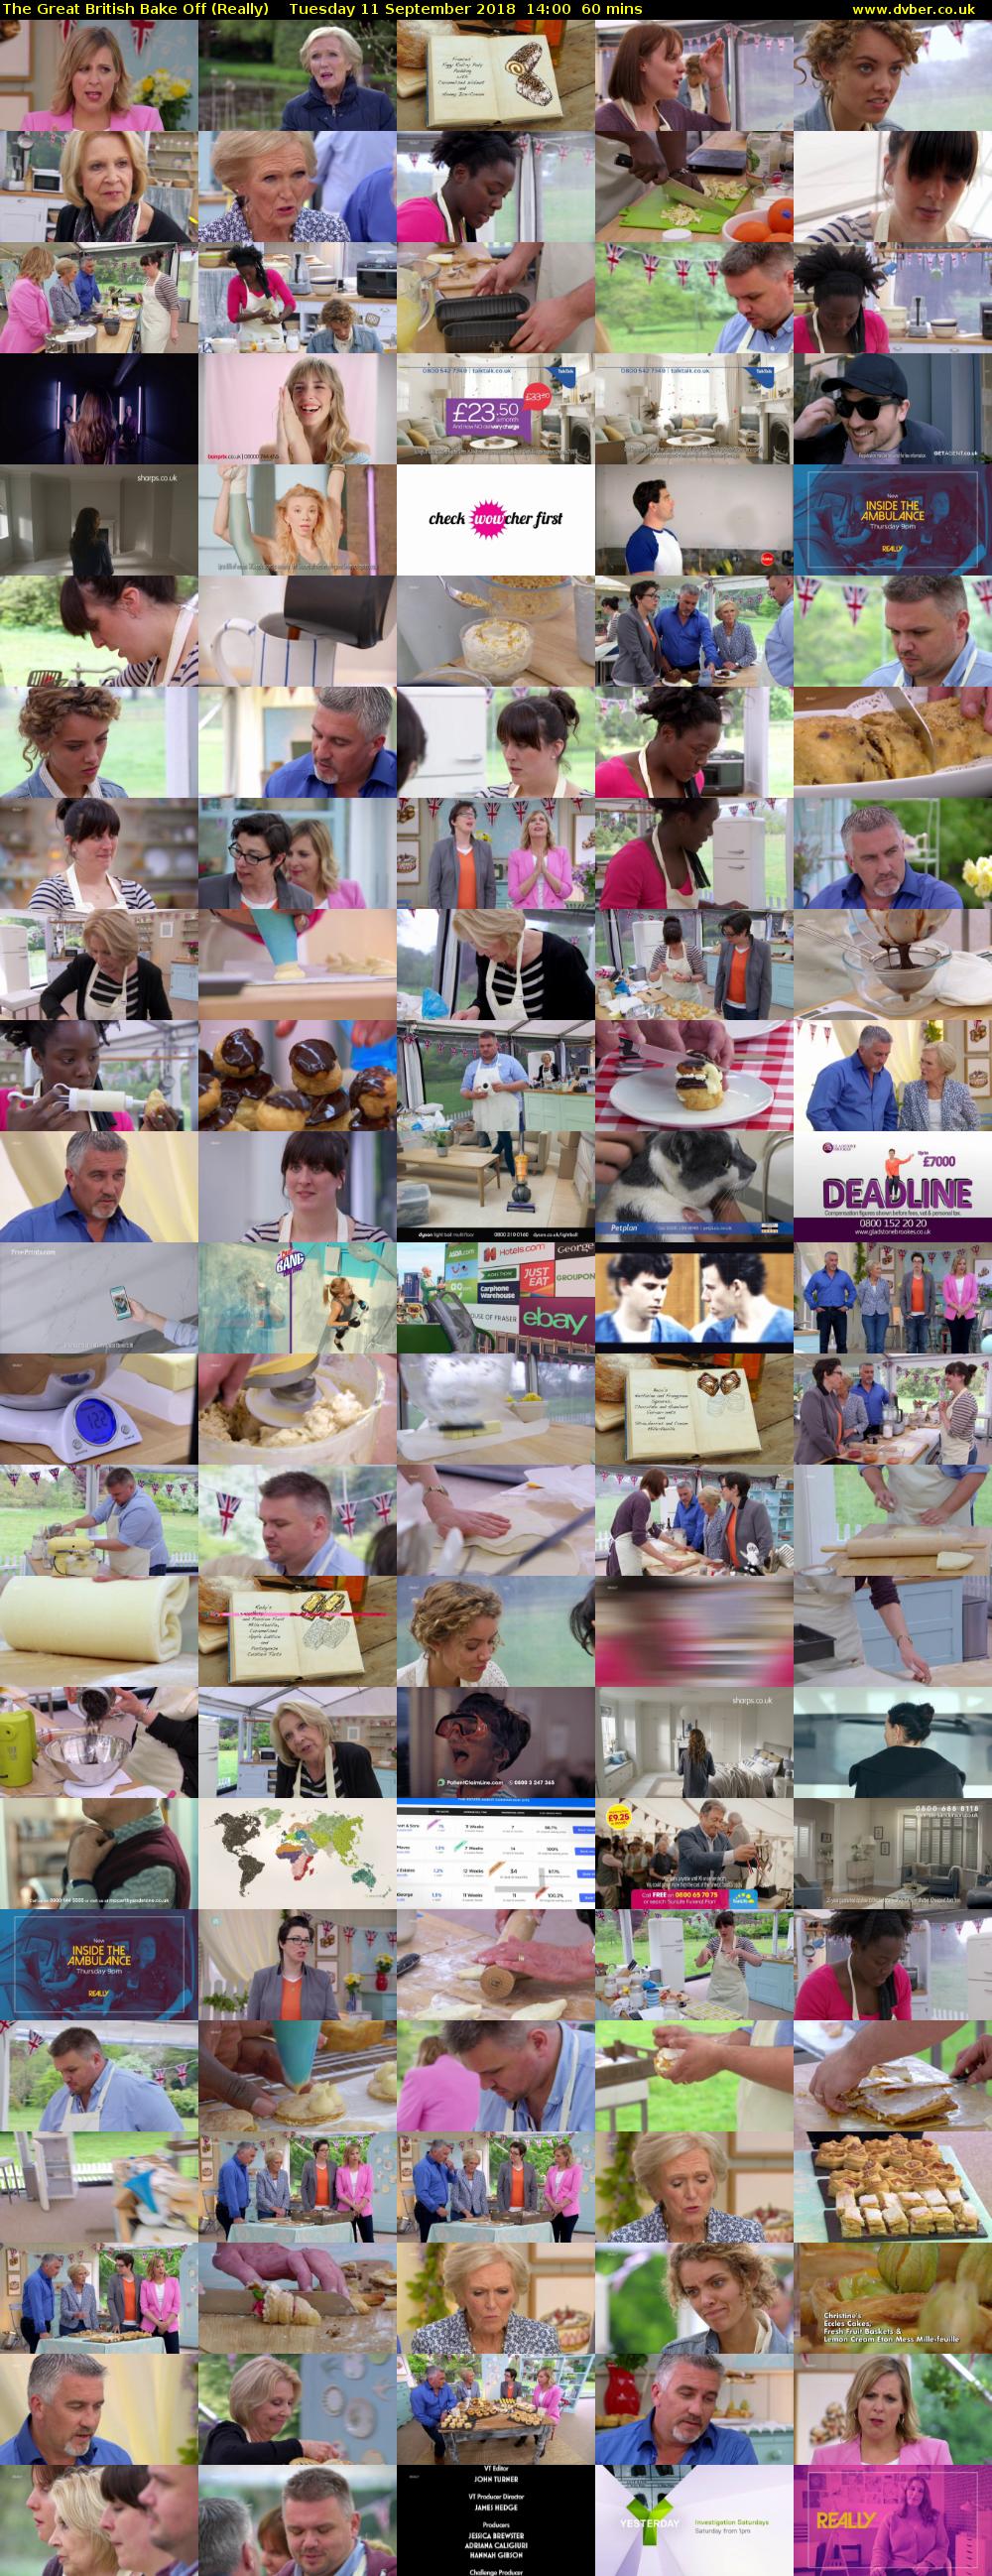 The Great British Bake Off (Really) Tuesday 11 September 2018 14:00 - 15:00